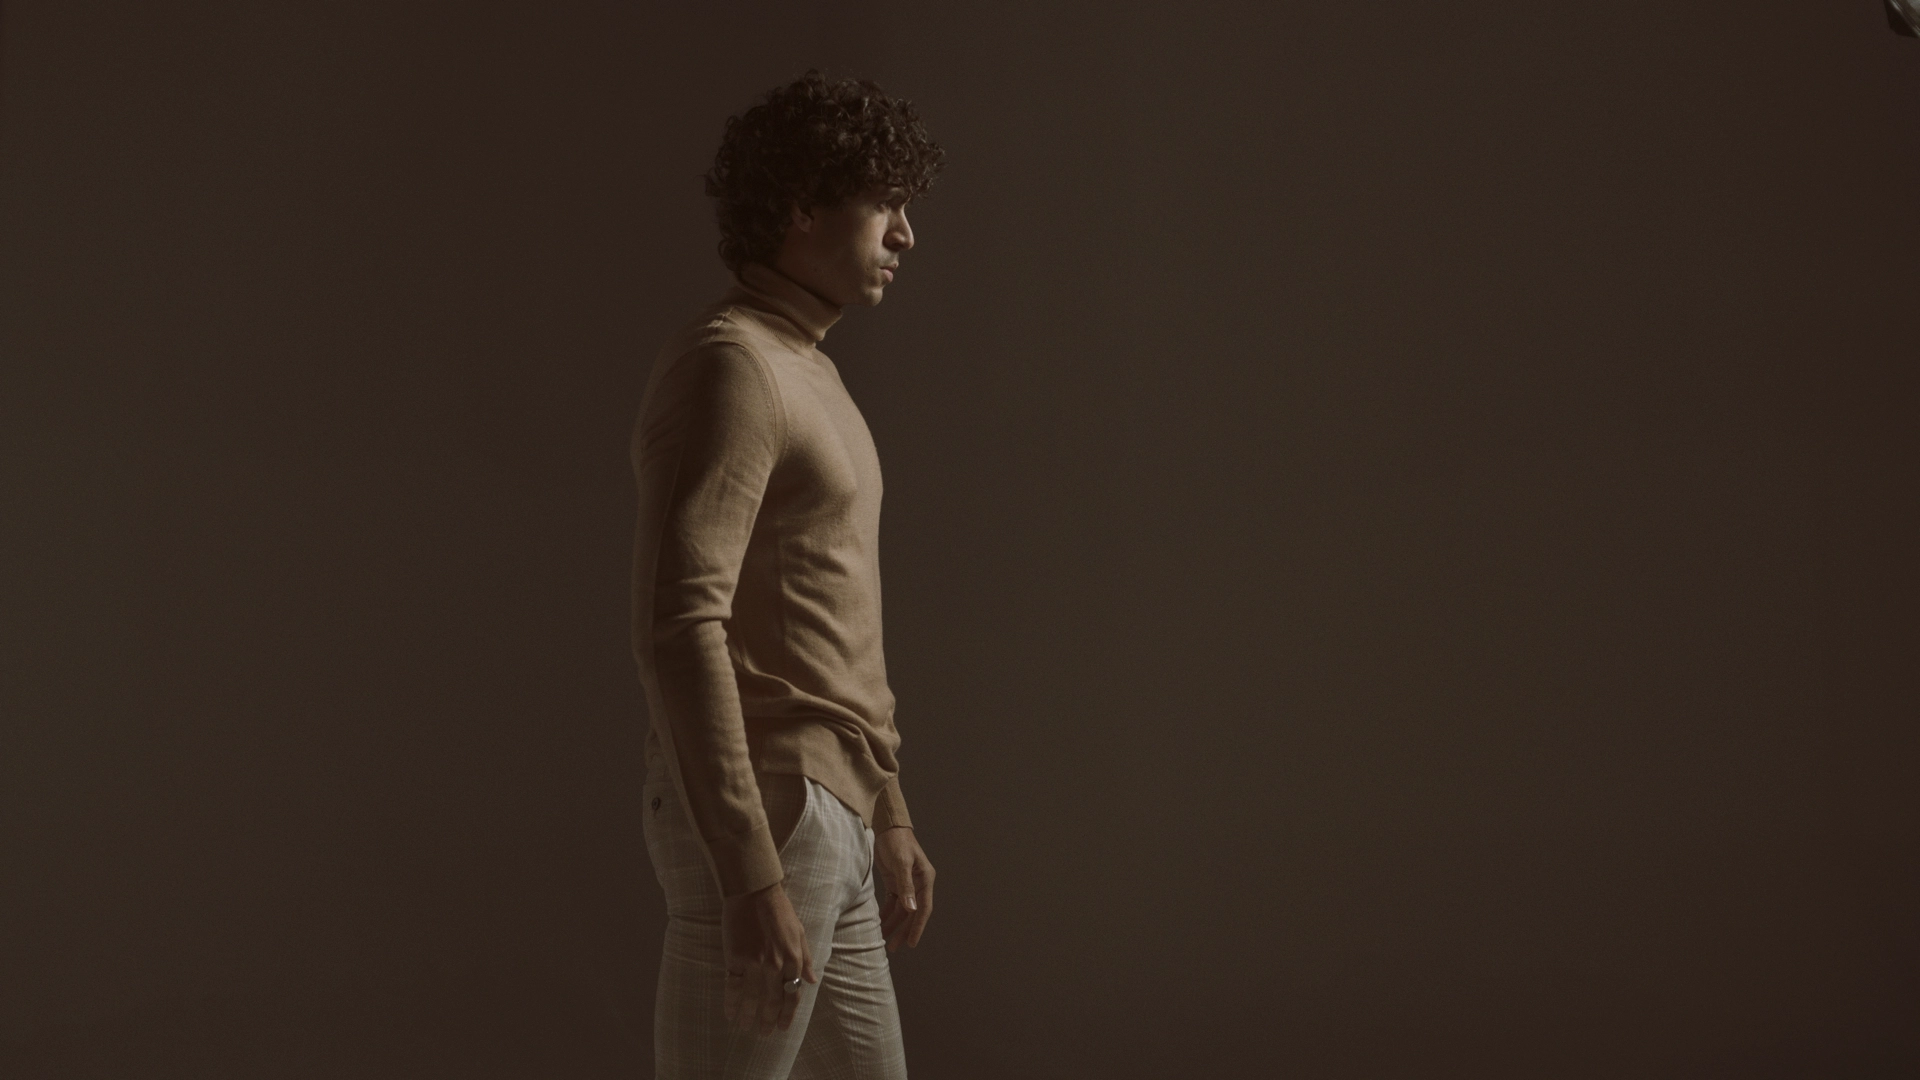 Side profile of man with curly hair wearing beige sweater and patterned pants